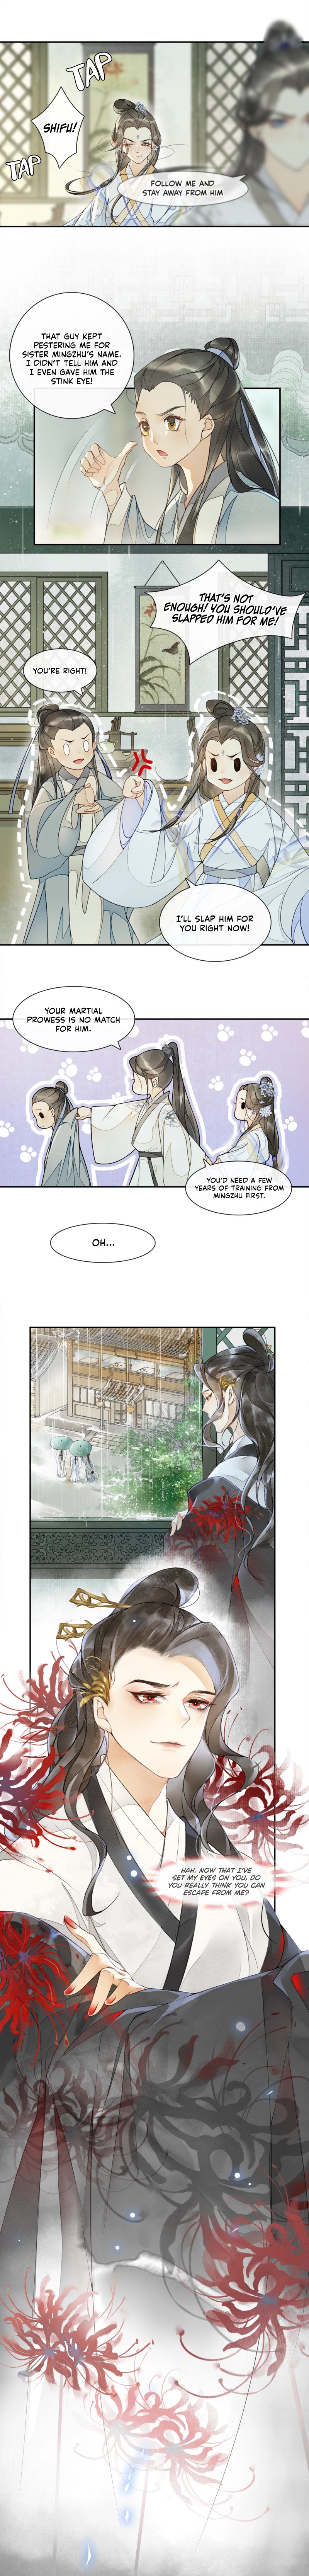 The Chronicles of Qing Xi chapter 13 page 8